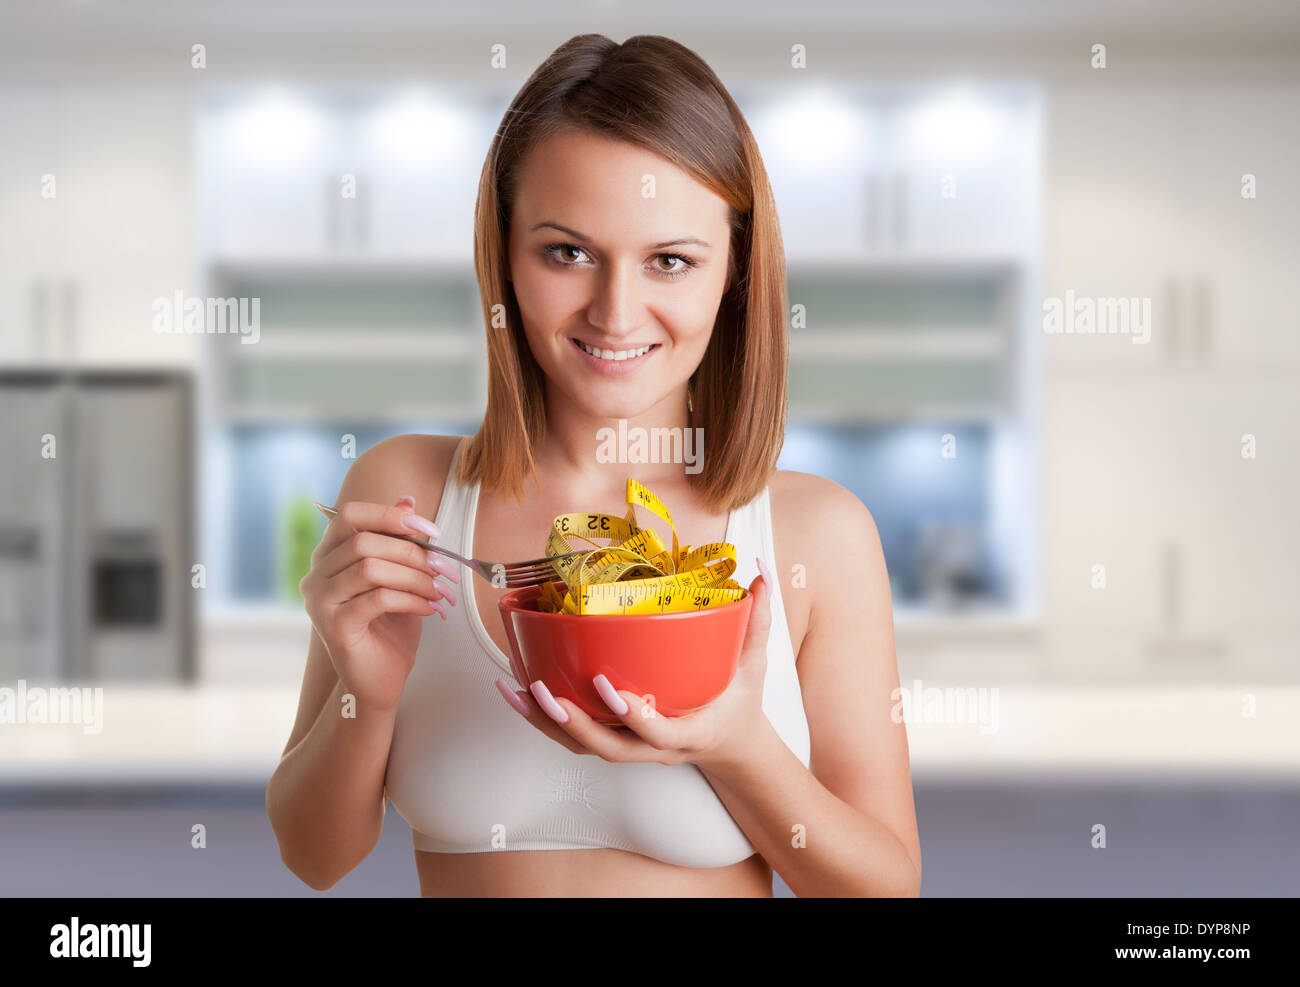 Concept image of a woman on a diet, eating a measuring tape, in a kitchen Stock Photo